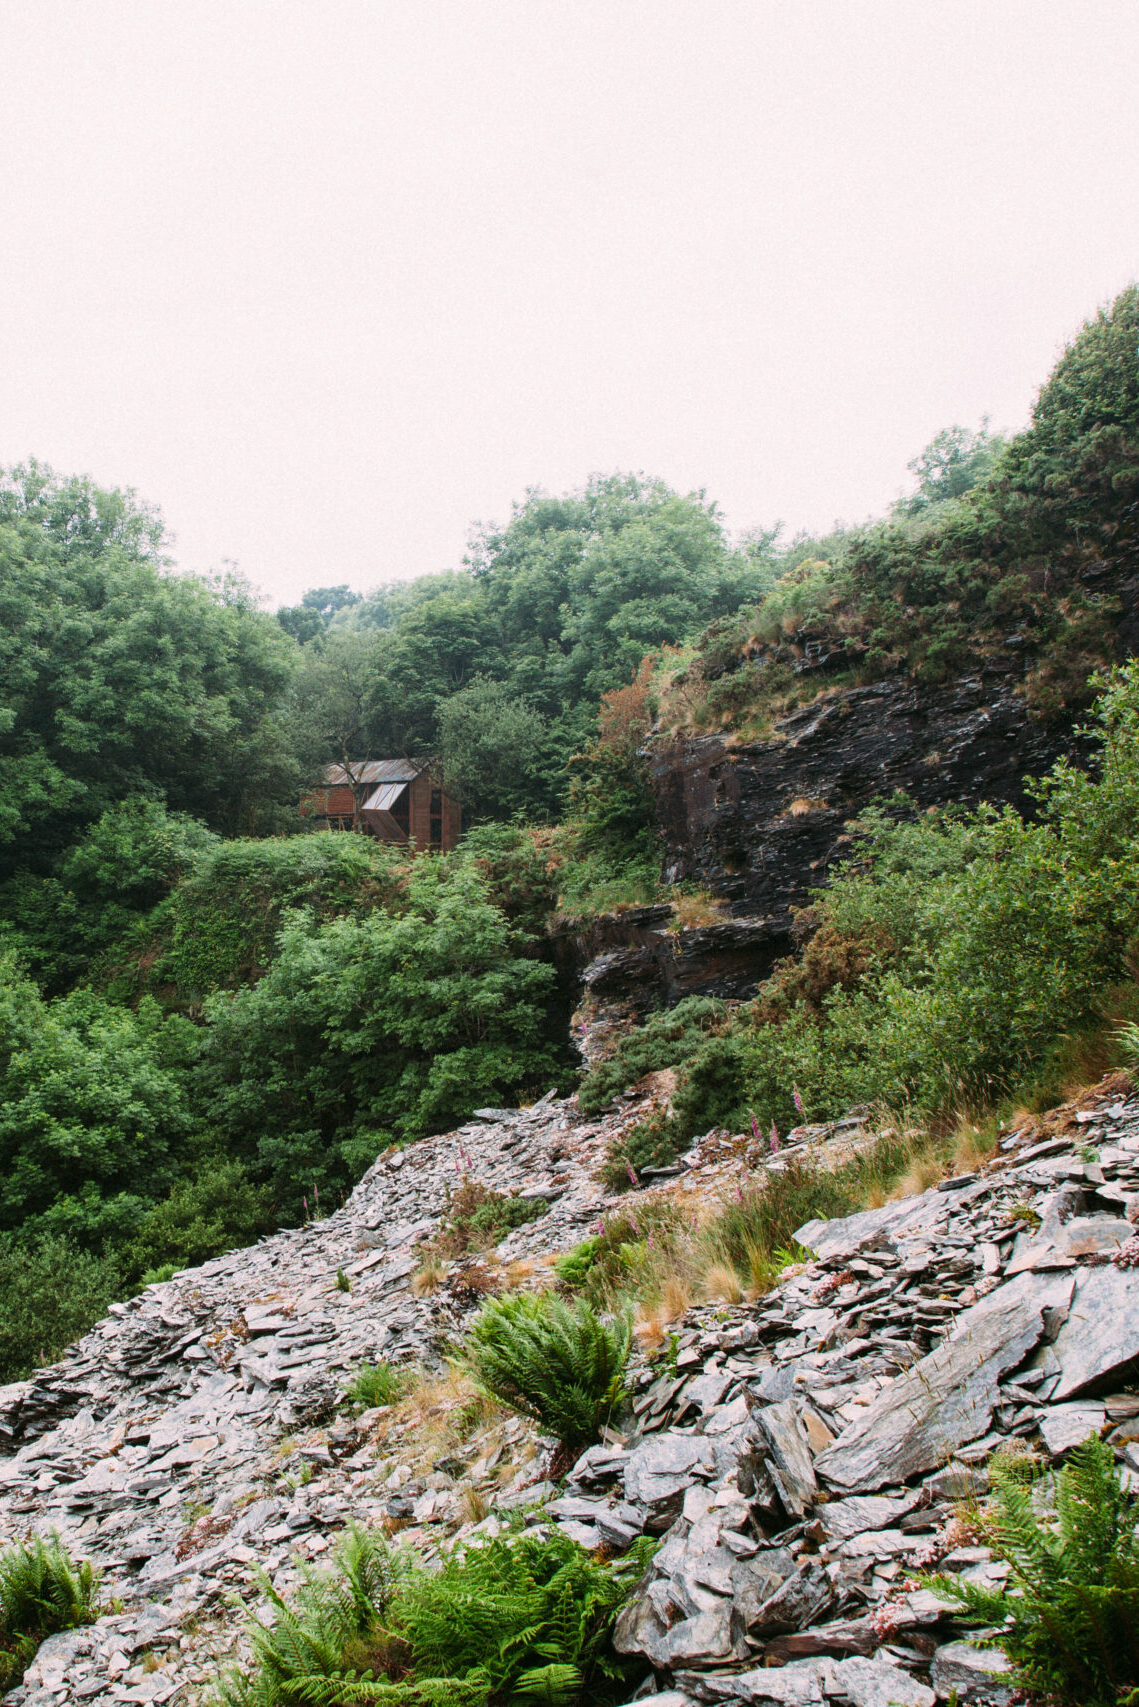 distant view of the Danish Cabin, nestled amongst trees and surrounded by slate from Kudhva's quarry history